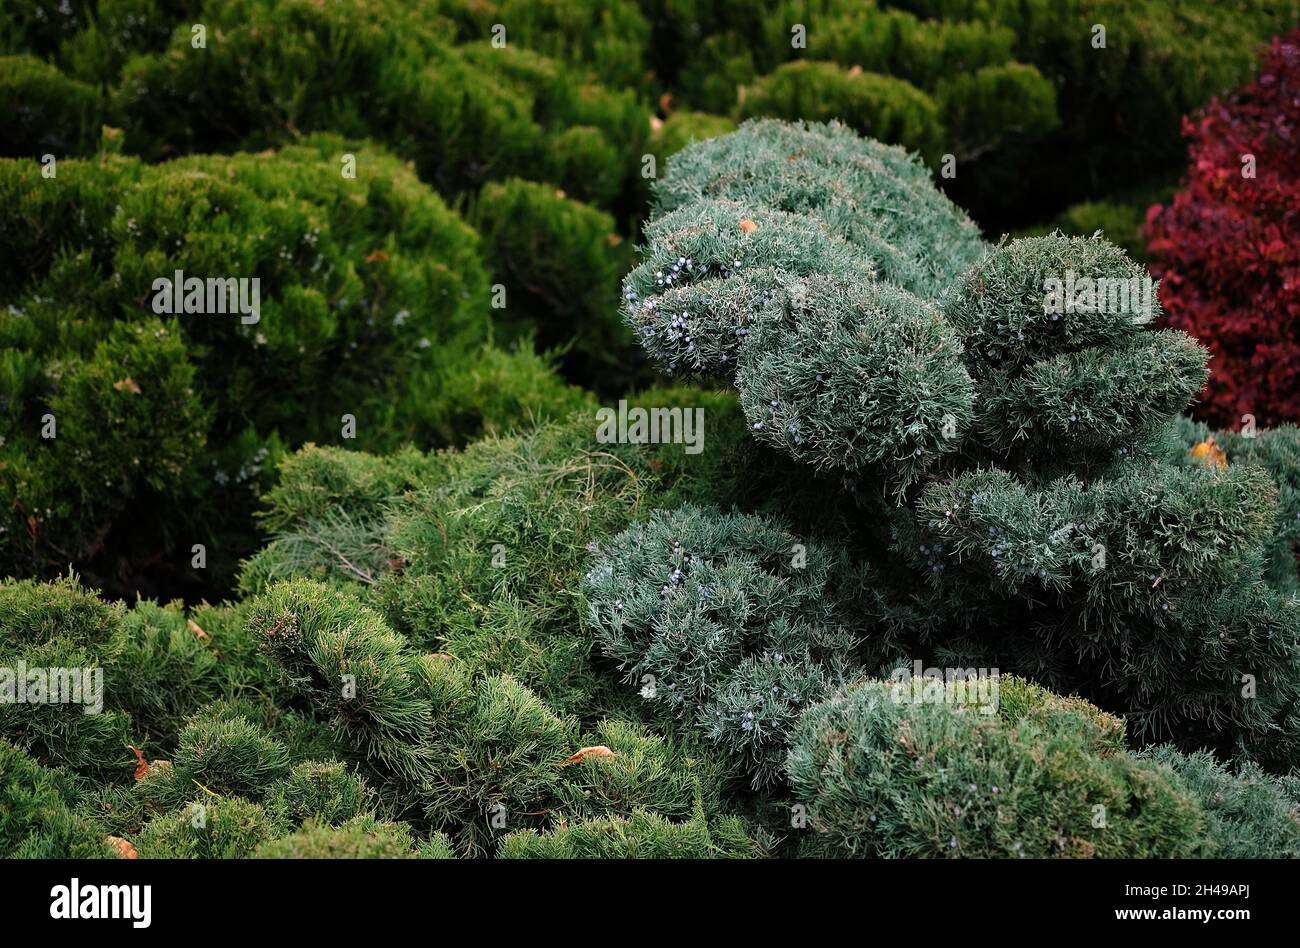 Coniferous shrubs and trees in autumn close-up. Juniper branches in the park background. Trimmed juniper bushes with blue berries. Landscape design us Stock Photo